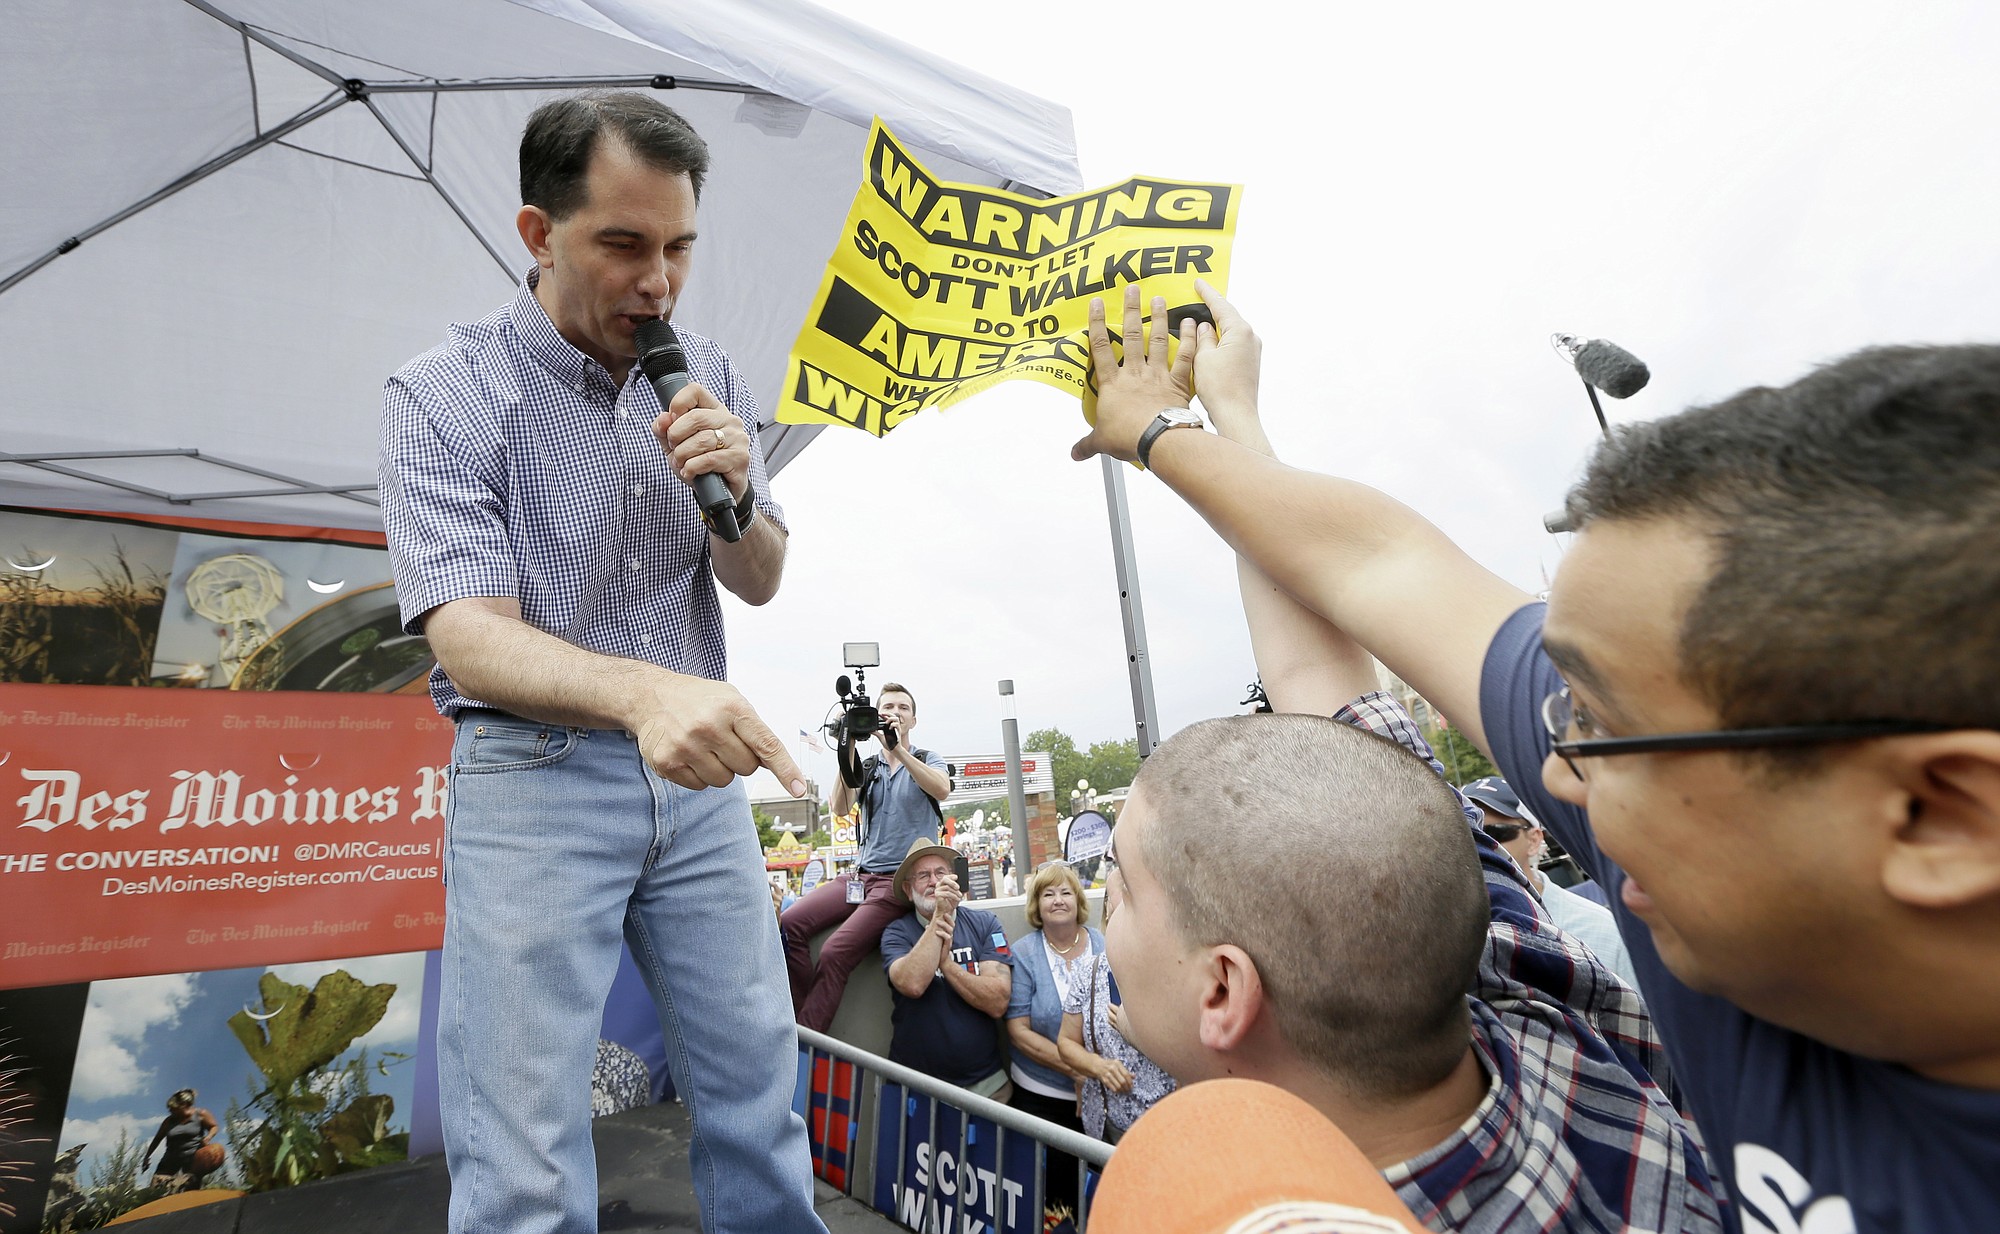 Republican presidential candidate, Wisconsin Gov. Scott Walker talks to a protestor as a supporter grabs his sign during a visit to the Iowa State Fair, Monday, Aug. 17, 2015, in Des Moines, Iowa.